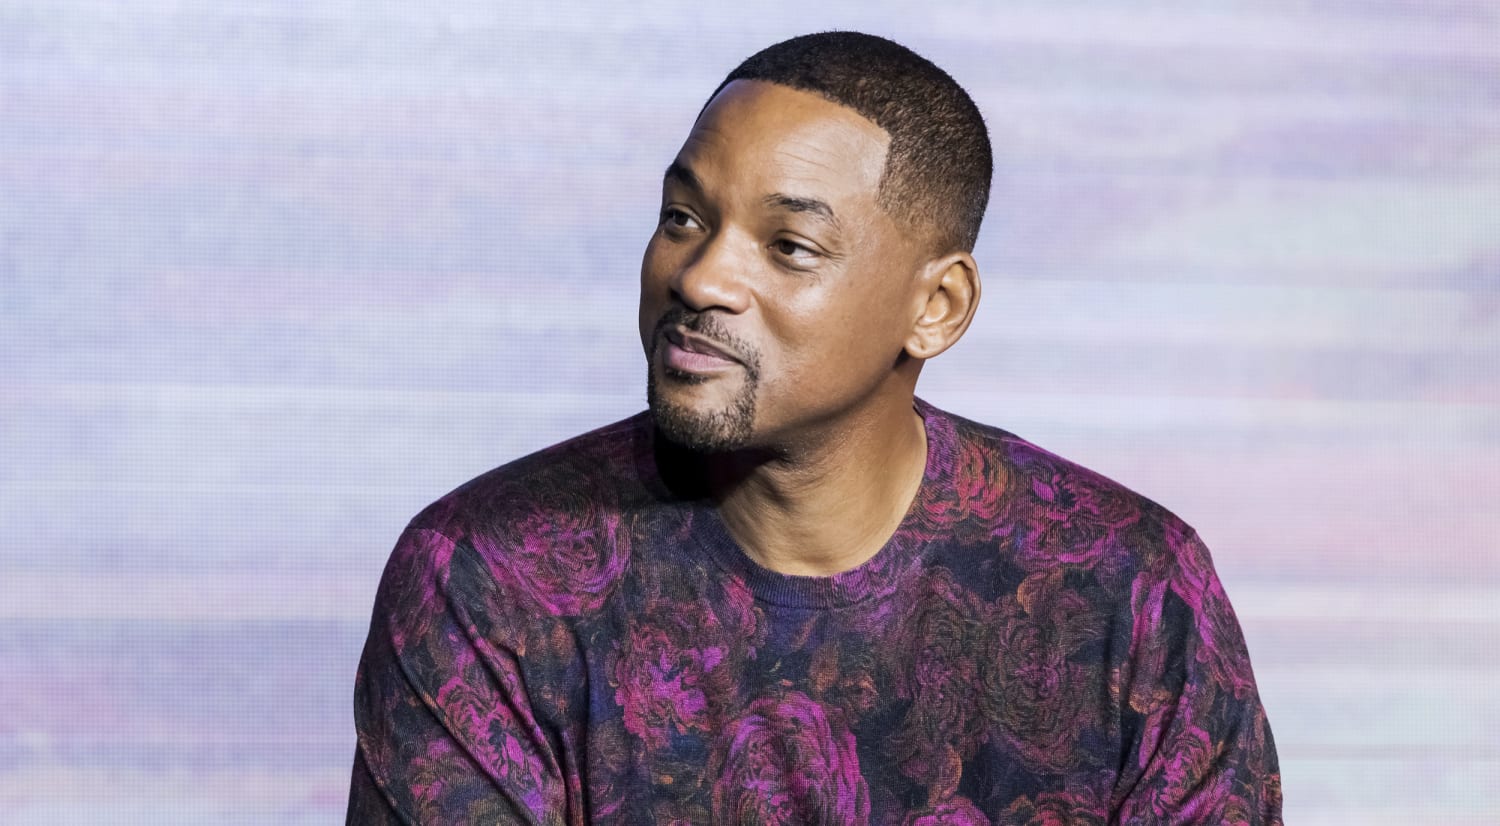 Will Smith reveals he once considered suicide in trailer for new YouTube docuseries